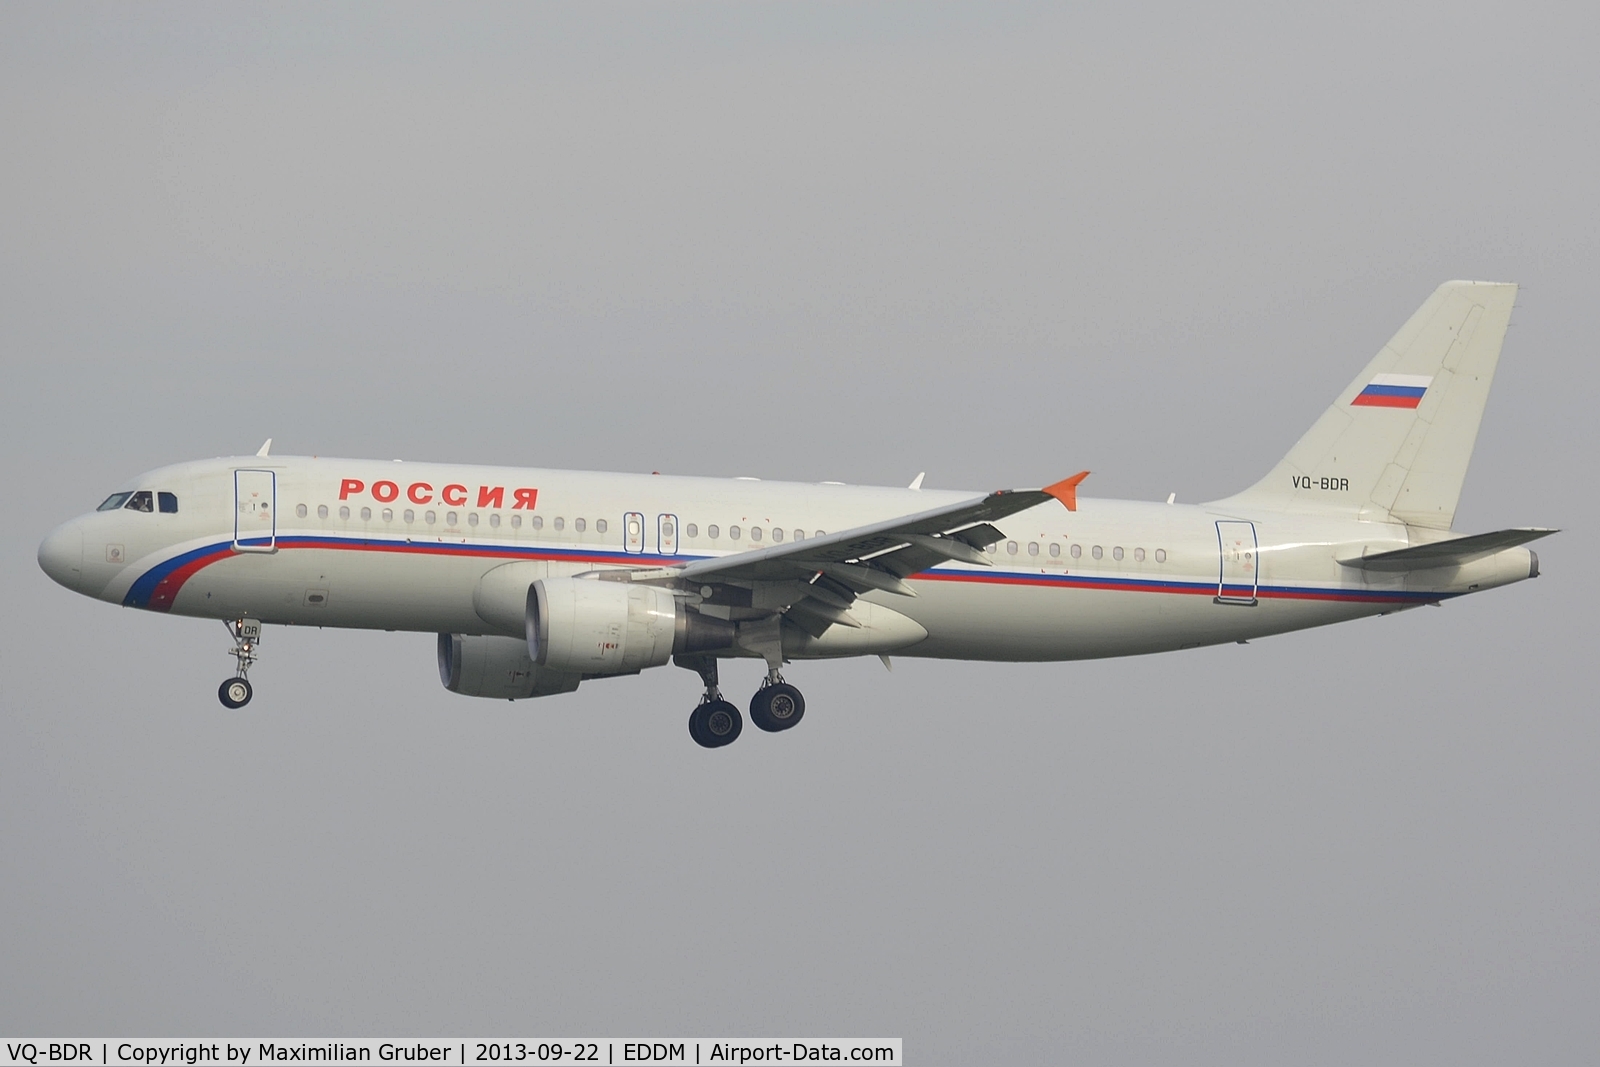 VQ-BDR, 1999 Airbus A320-214 C/N 1130, Rossiya - Russian Airlines